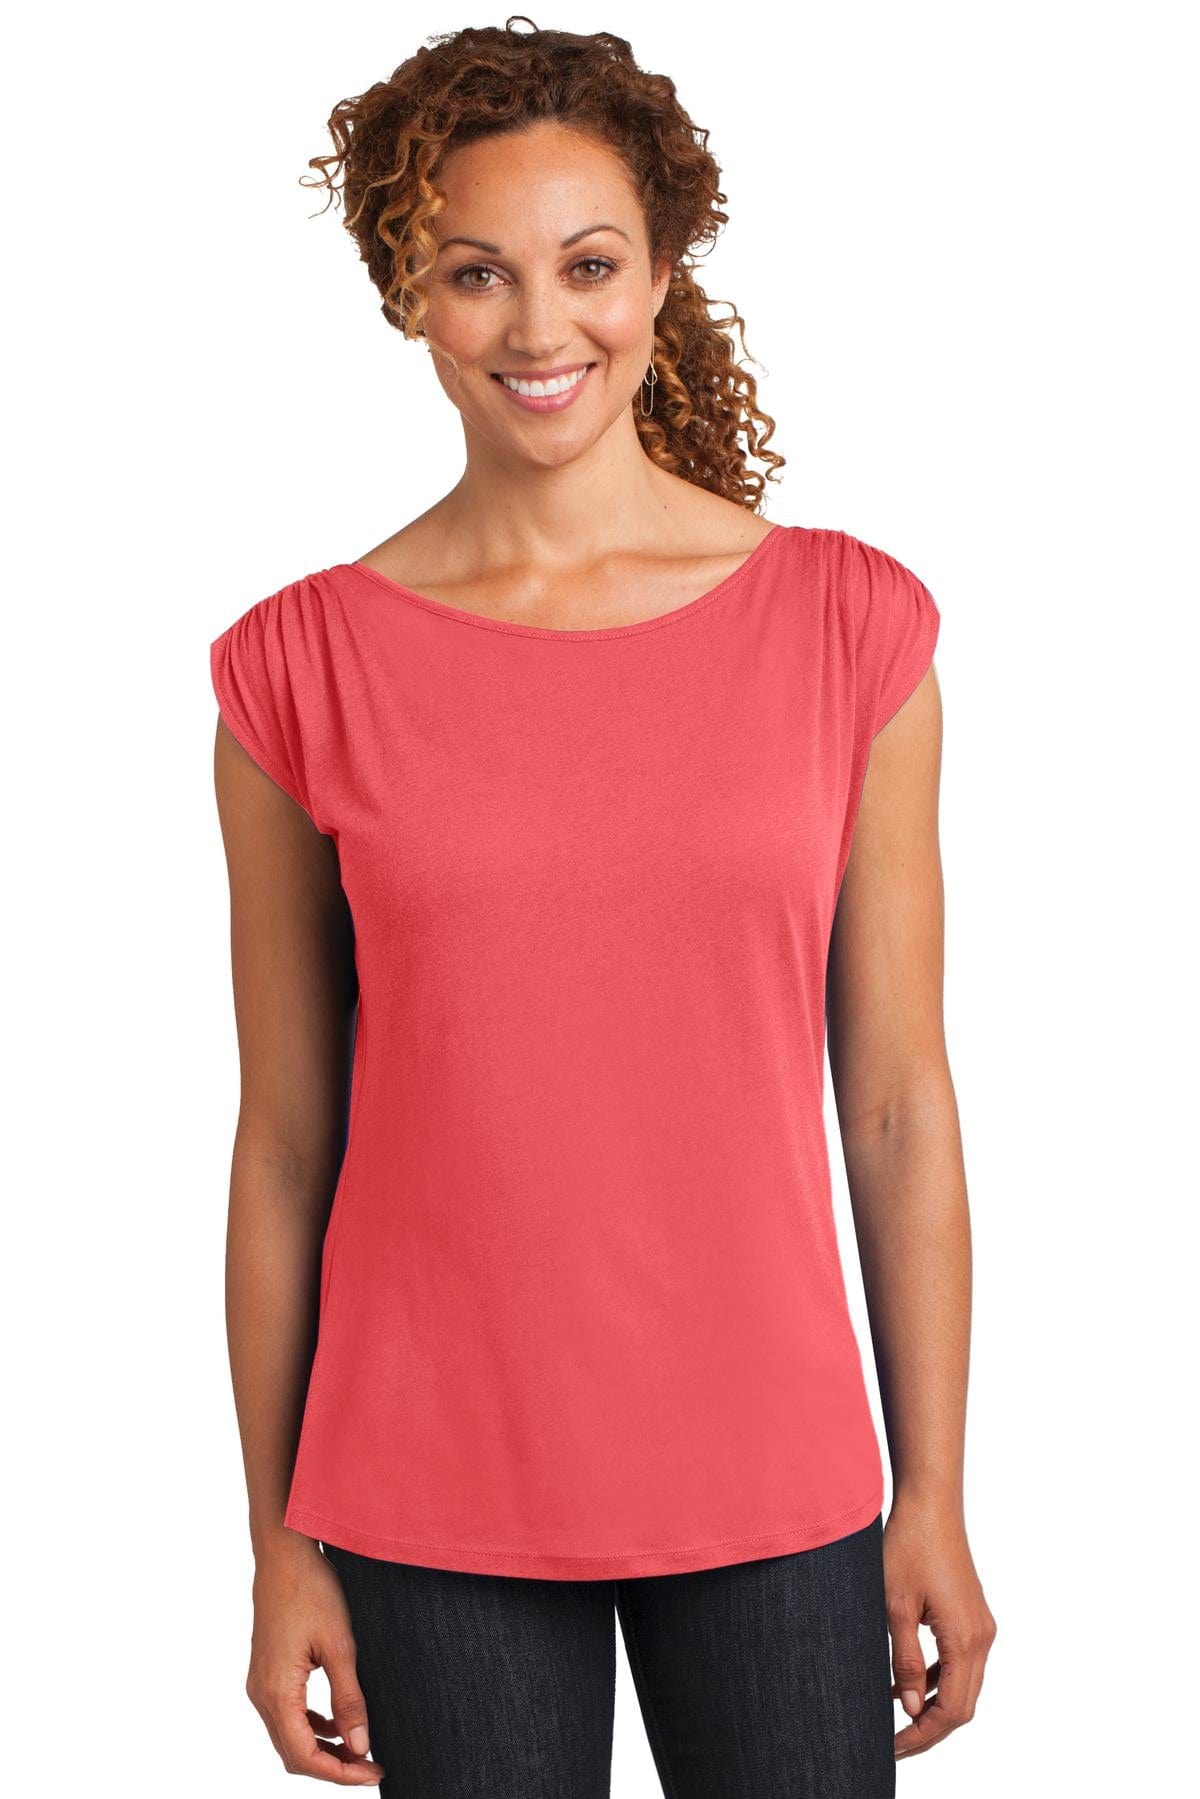 DISCONTINUED District Made ® Ladies Modal Blend Gathered Shoulder Tee. DM483